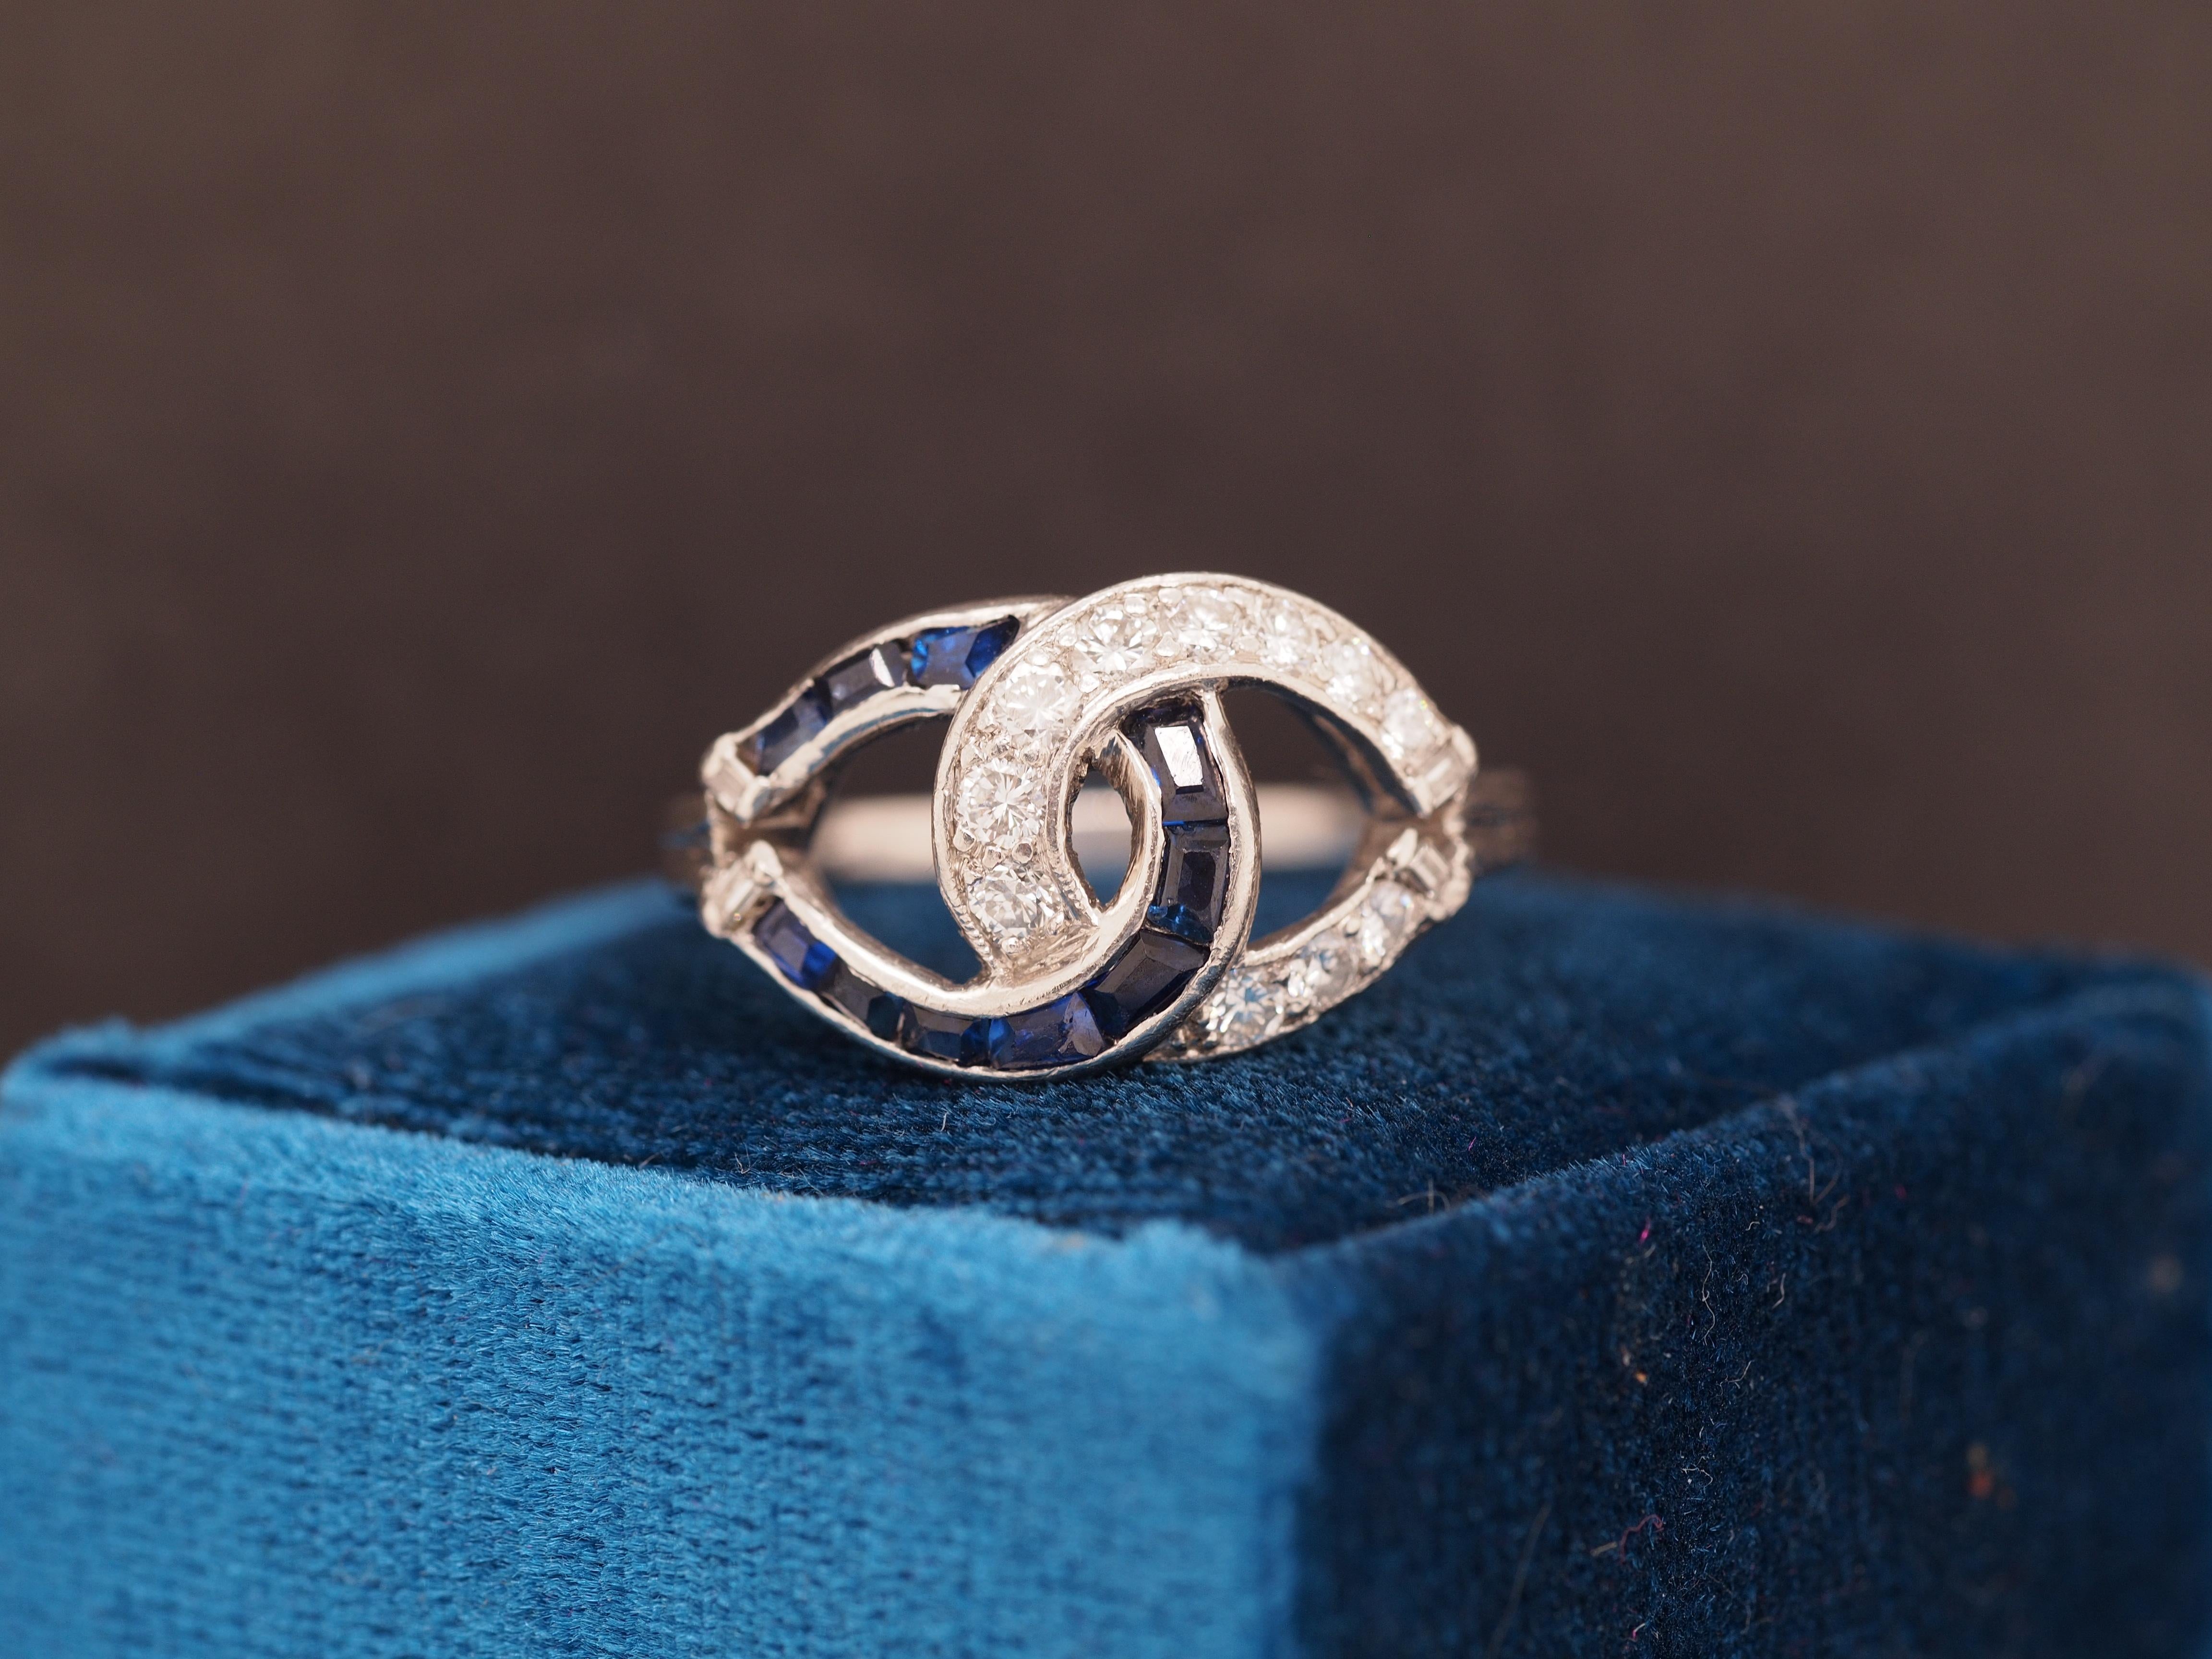 Year: 1950s
Item Details:
Ring Size: 7.25
Metal Type: Platinum [Hallmarked, and Tested]
Weight: 6.1 grams
Diamond Details: .30ct total weight, natural diamonds, E-F Color, VS Clarity, Transitional Round Cut & Straight Baguette Cut
Sapphire Details: